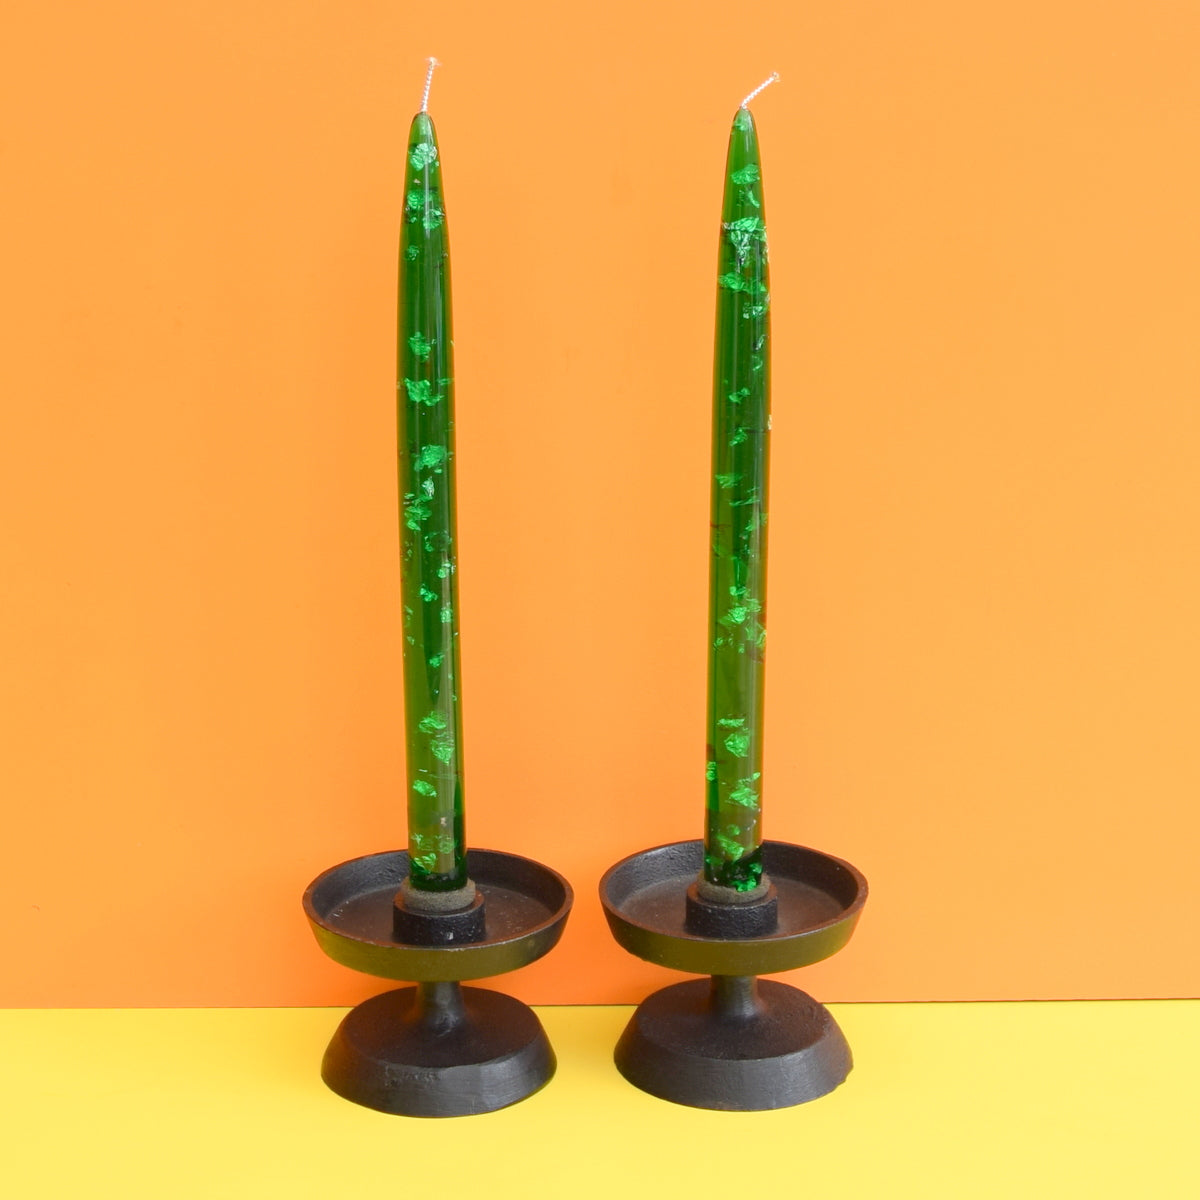 Vintage 1960s Cast Metal Candle Holder Pair - Green Plastic Flake Nachtmann Candles